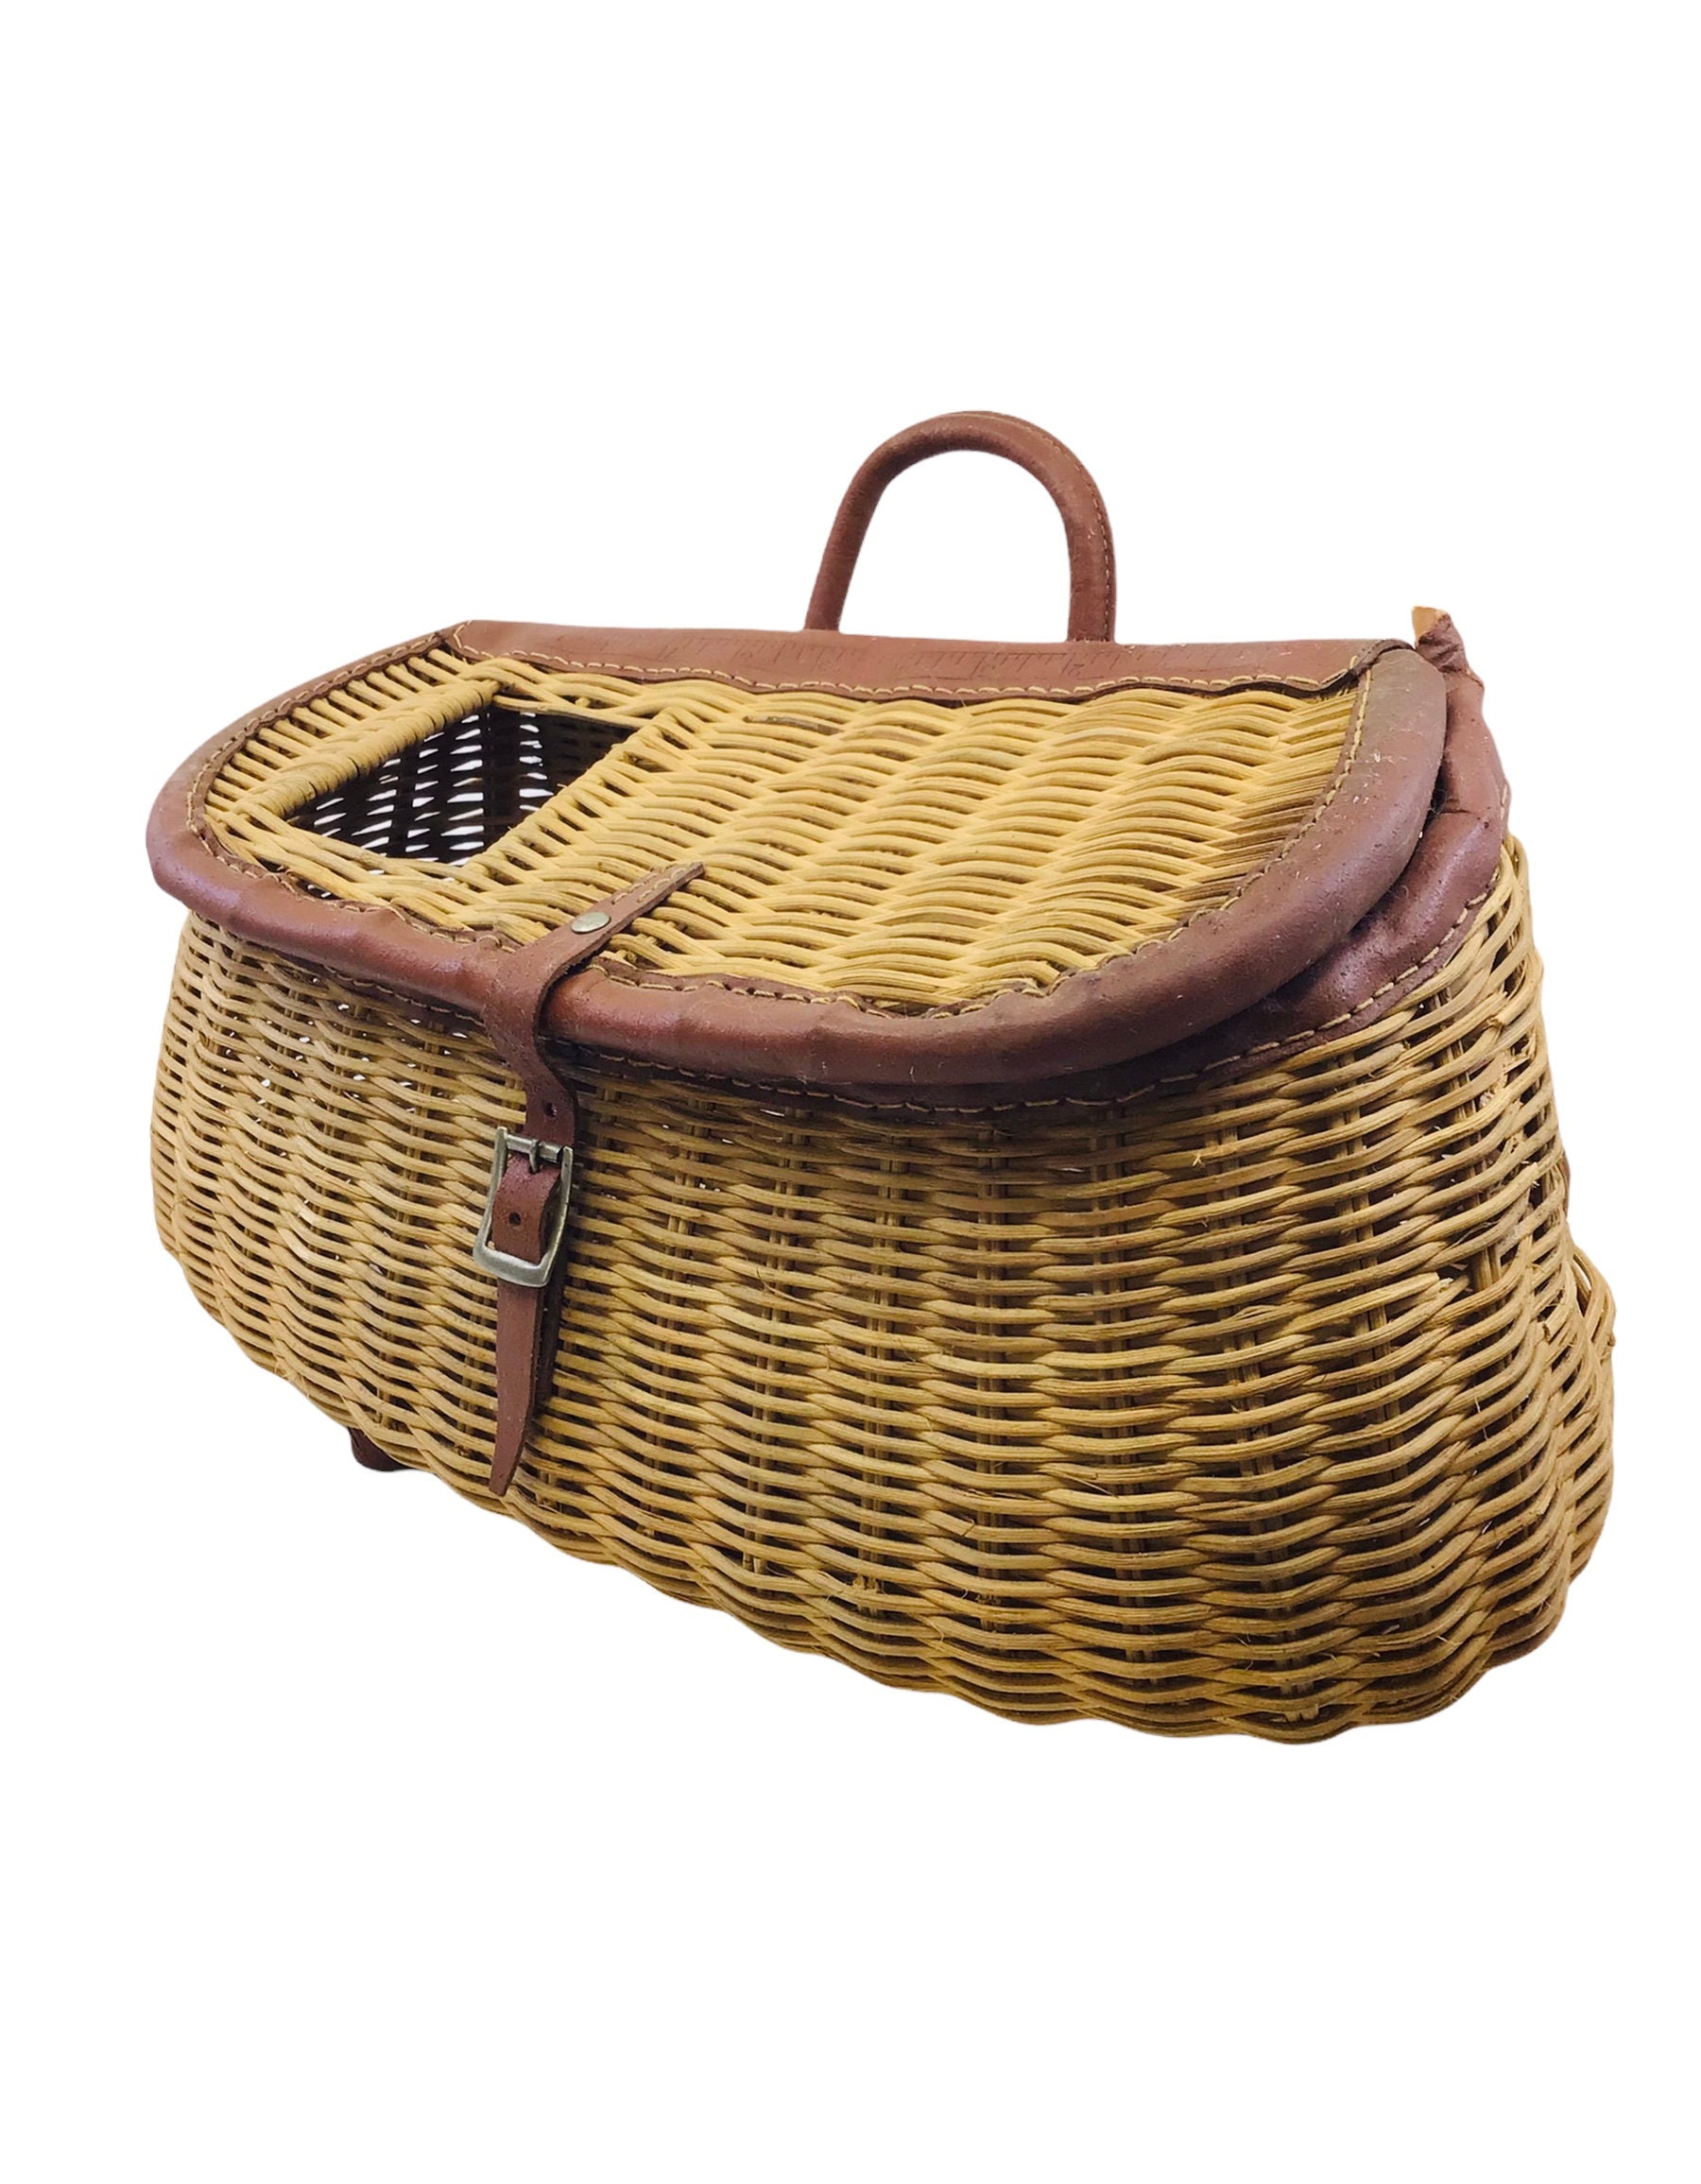 Vintage Fly Fishing Basket W/ Embossed Leather Strap Rustic Cabin Decor 